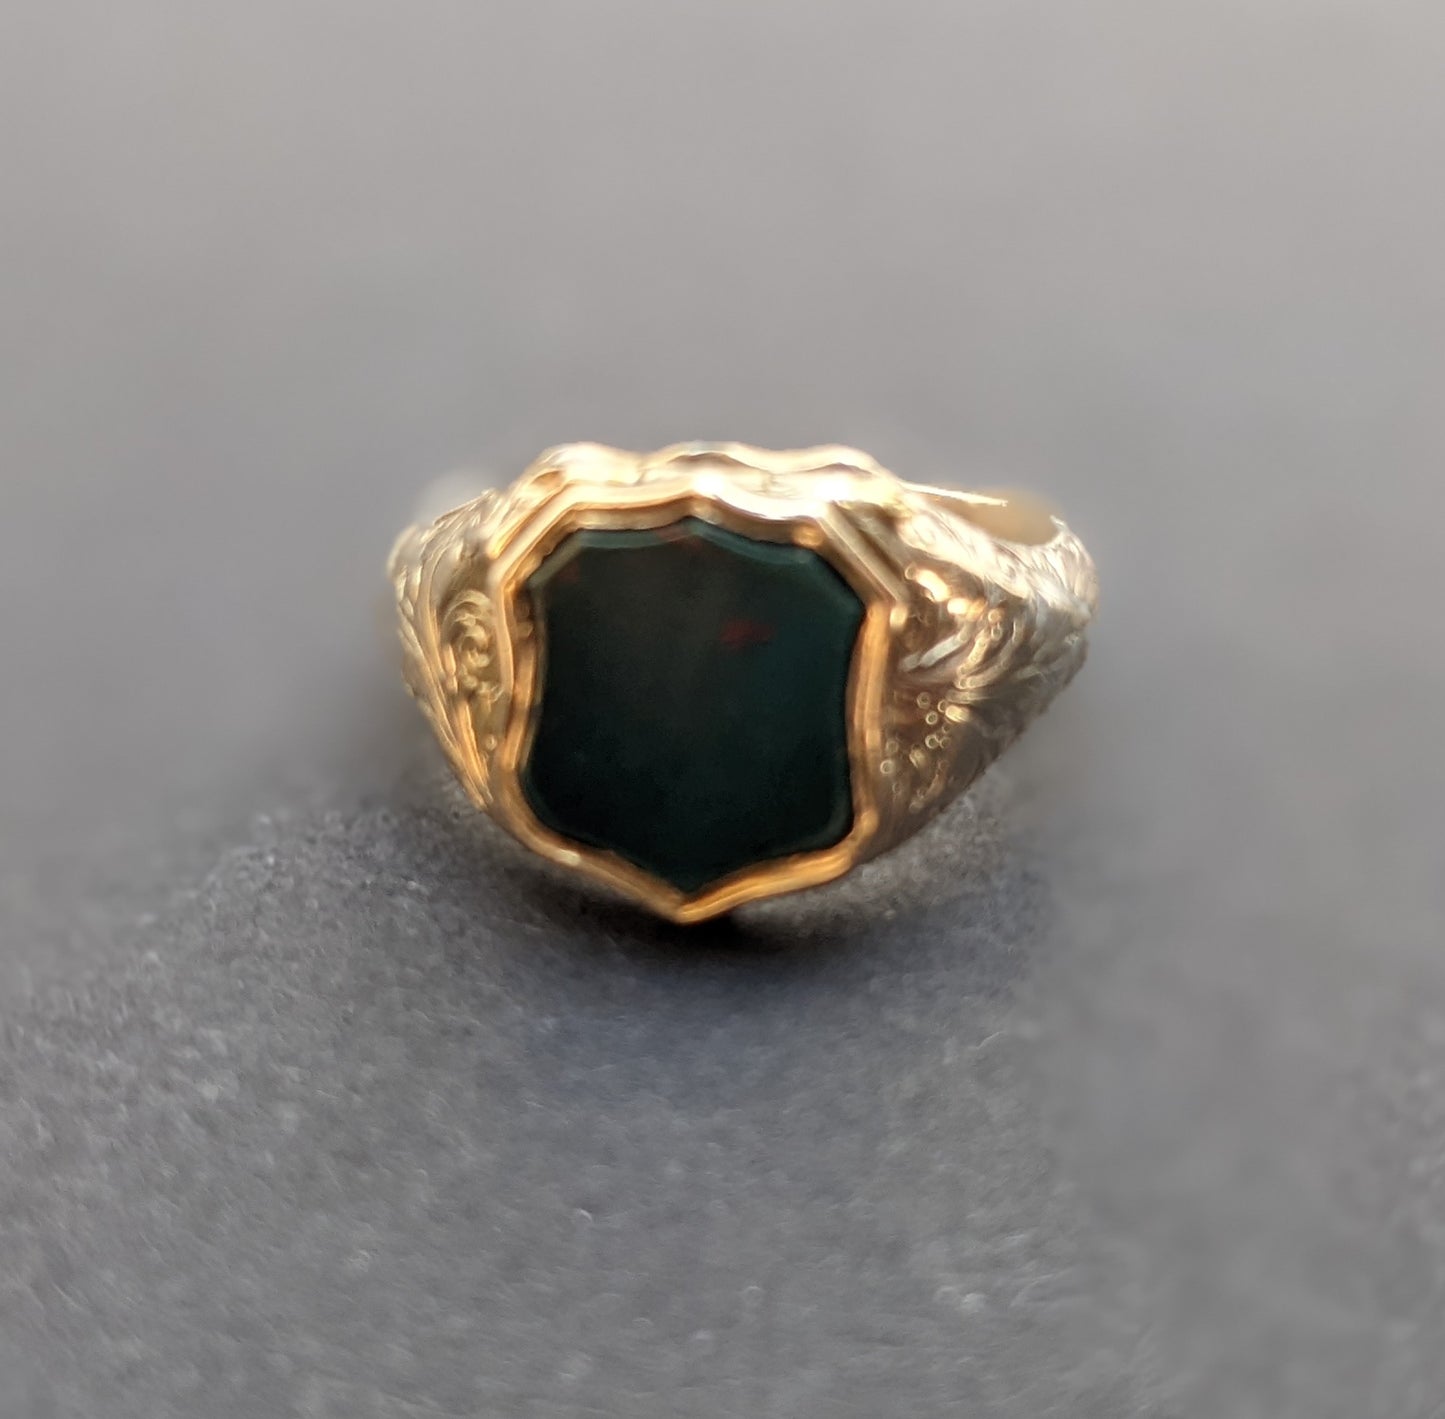 Bloodstone signet ring with hidden compartment